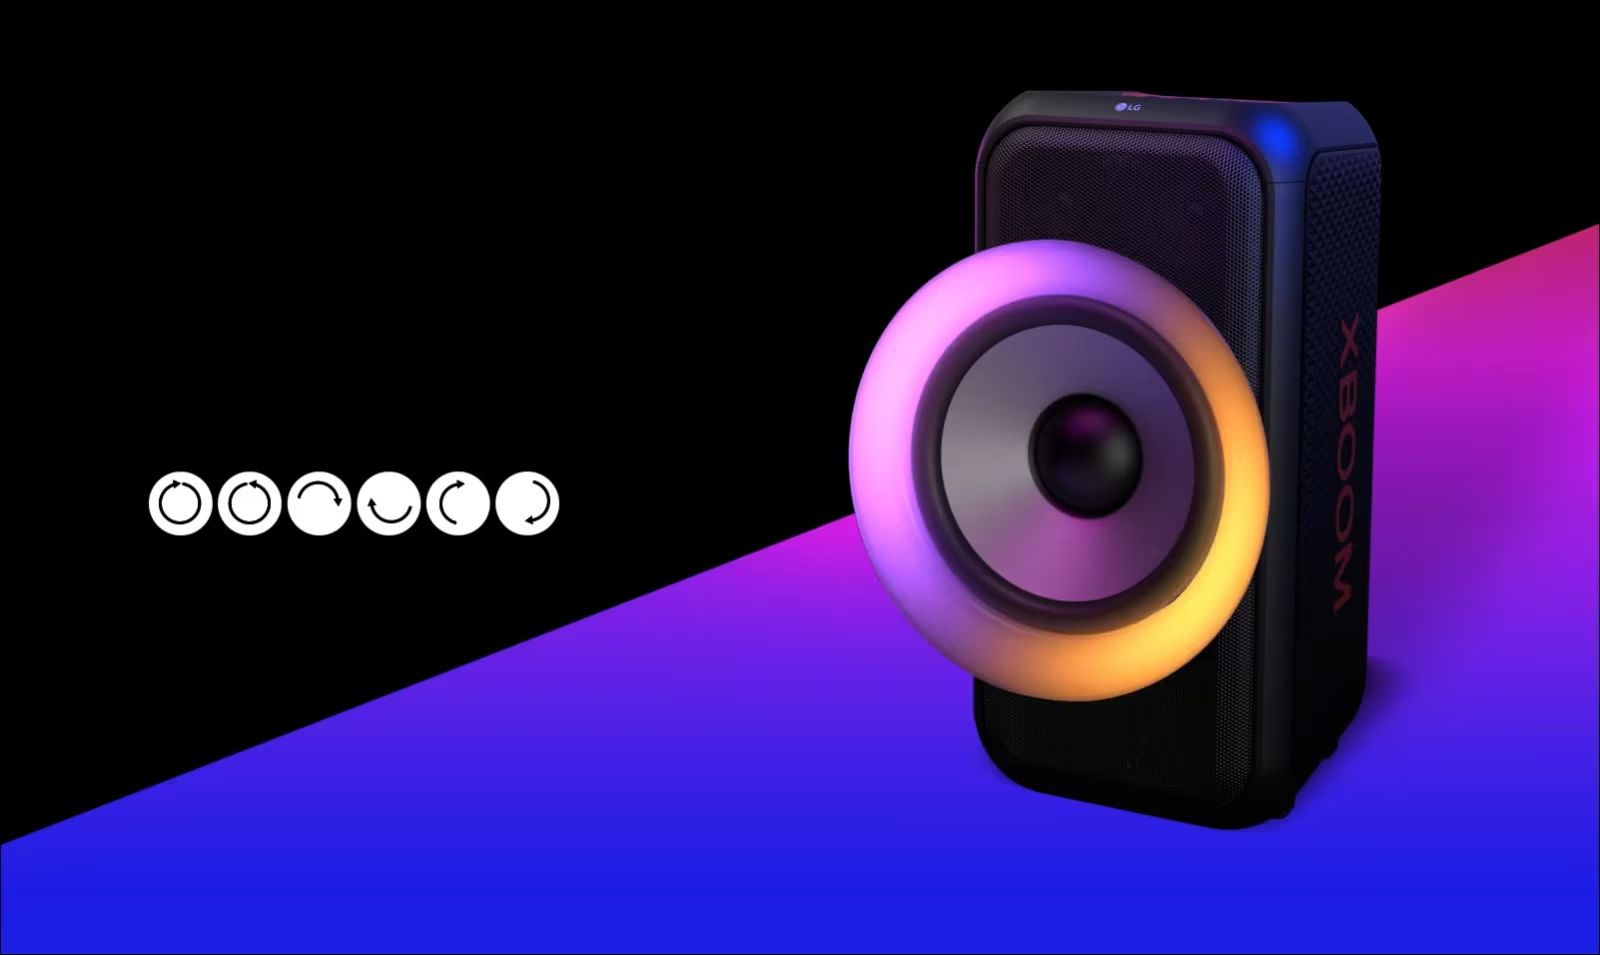 Text is placed on the black colored area, and the pictogram of multi color ring lighting's movements are shown; clockwise, counter-clockwise, upper and lower semicircle, left and right semicircle, and flash effect. The speaker is placed 45 degree angle to the left. And there is purple gradient colored area underneath for design purpose. 6.5-inch woofer is exaggerated in order to highlight its various colors.